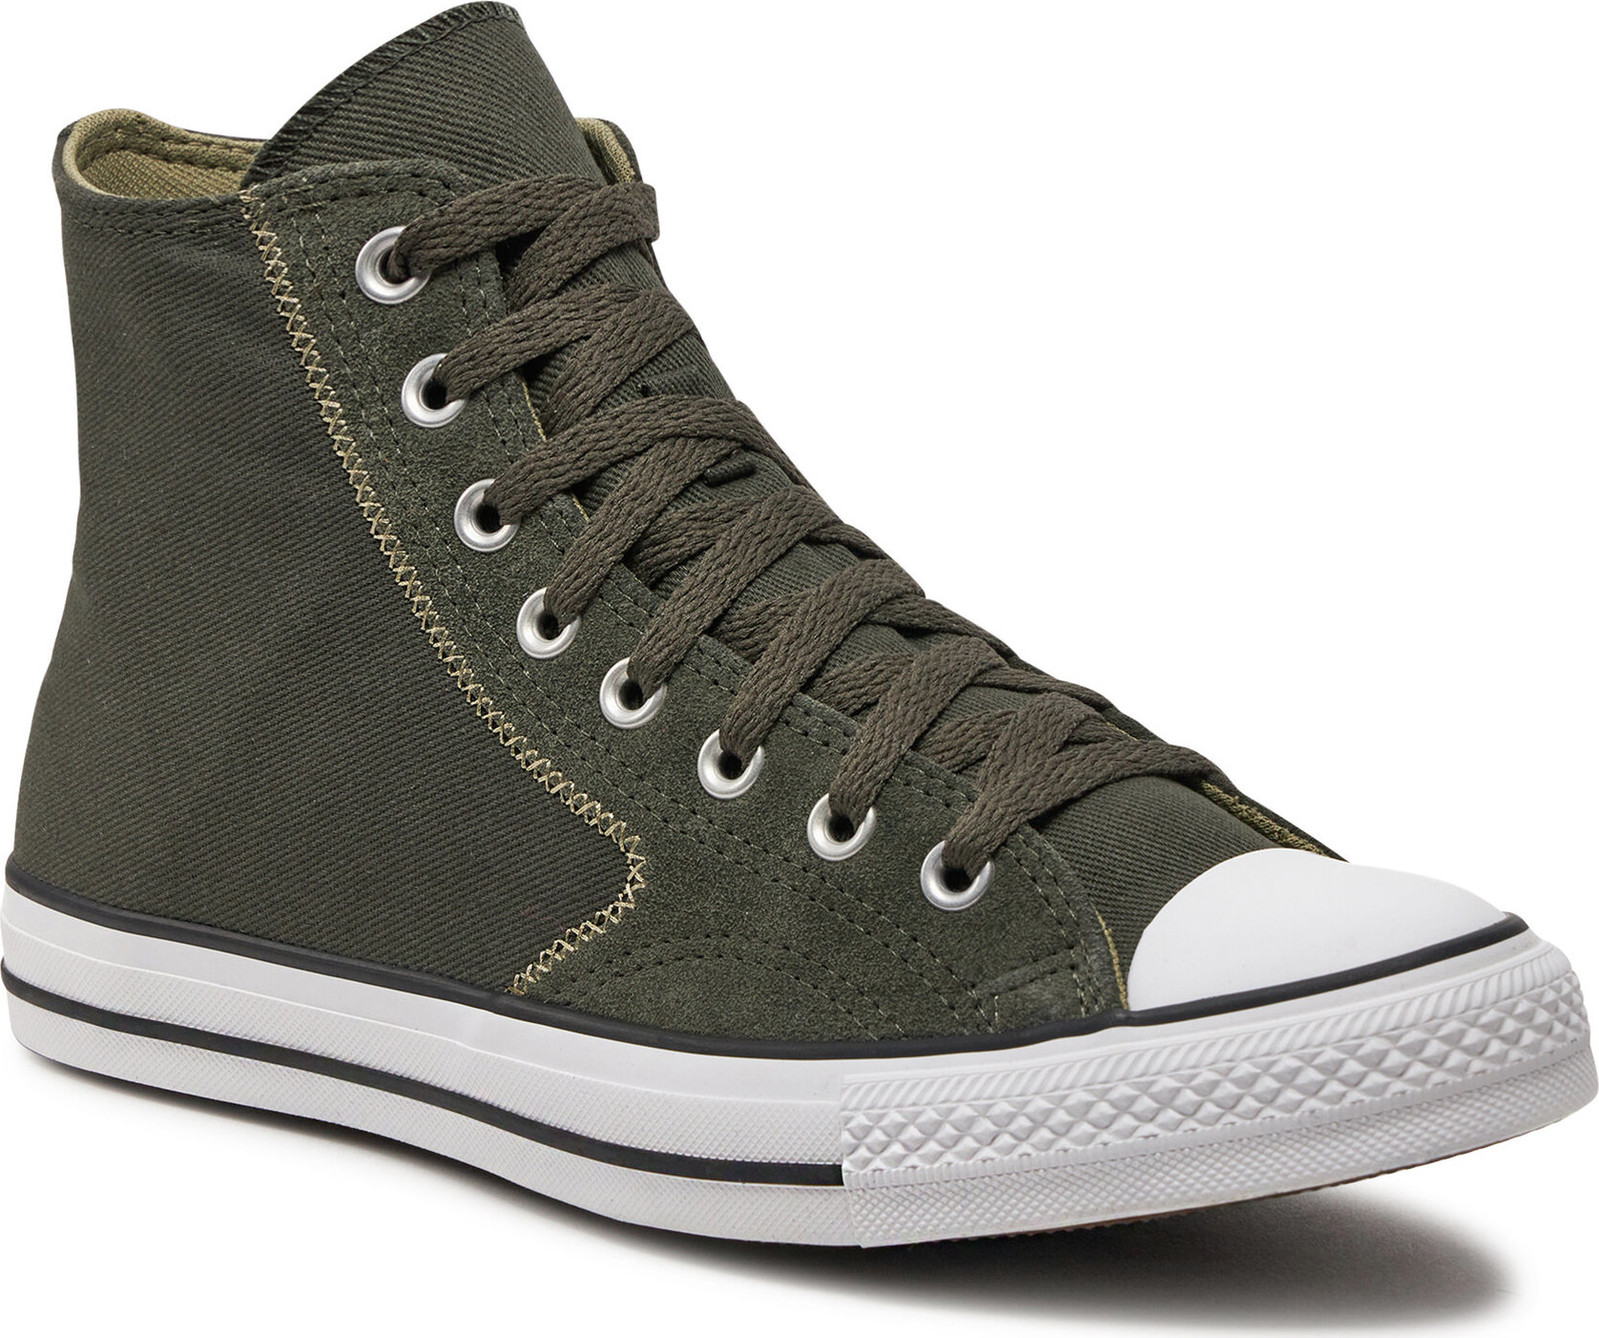 Plátěnky Converse Chuck Taylor All Star Mixed Materials A06572C Cave Green/Mossy Sloth